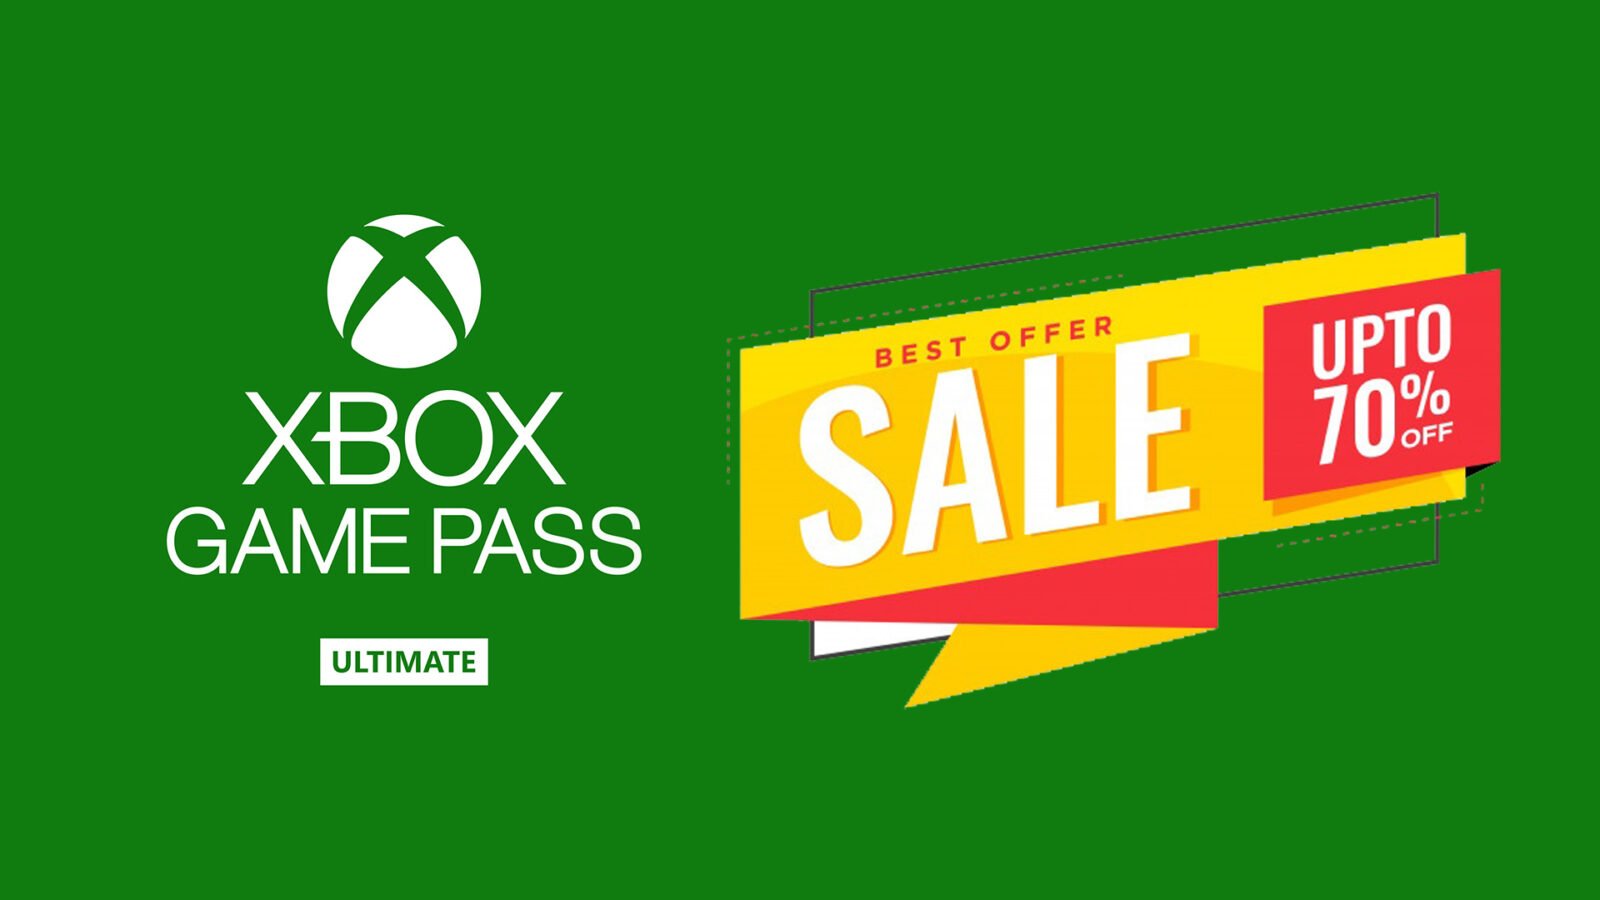 how long is xbox game pass for $1